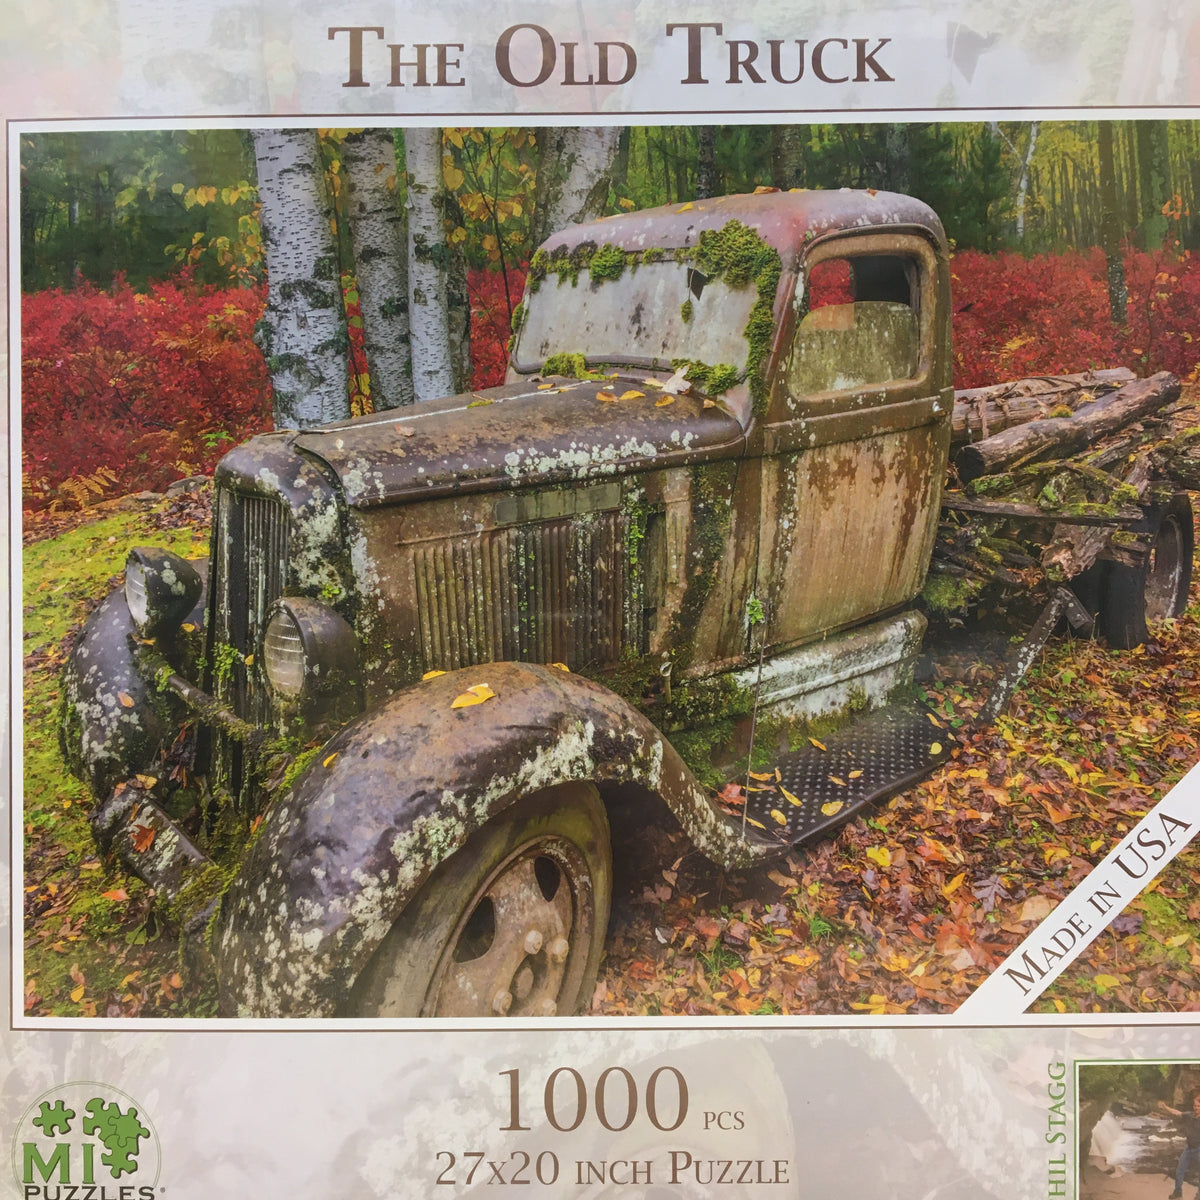 The Old Truck 1000 pc Puzzle